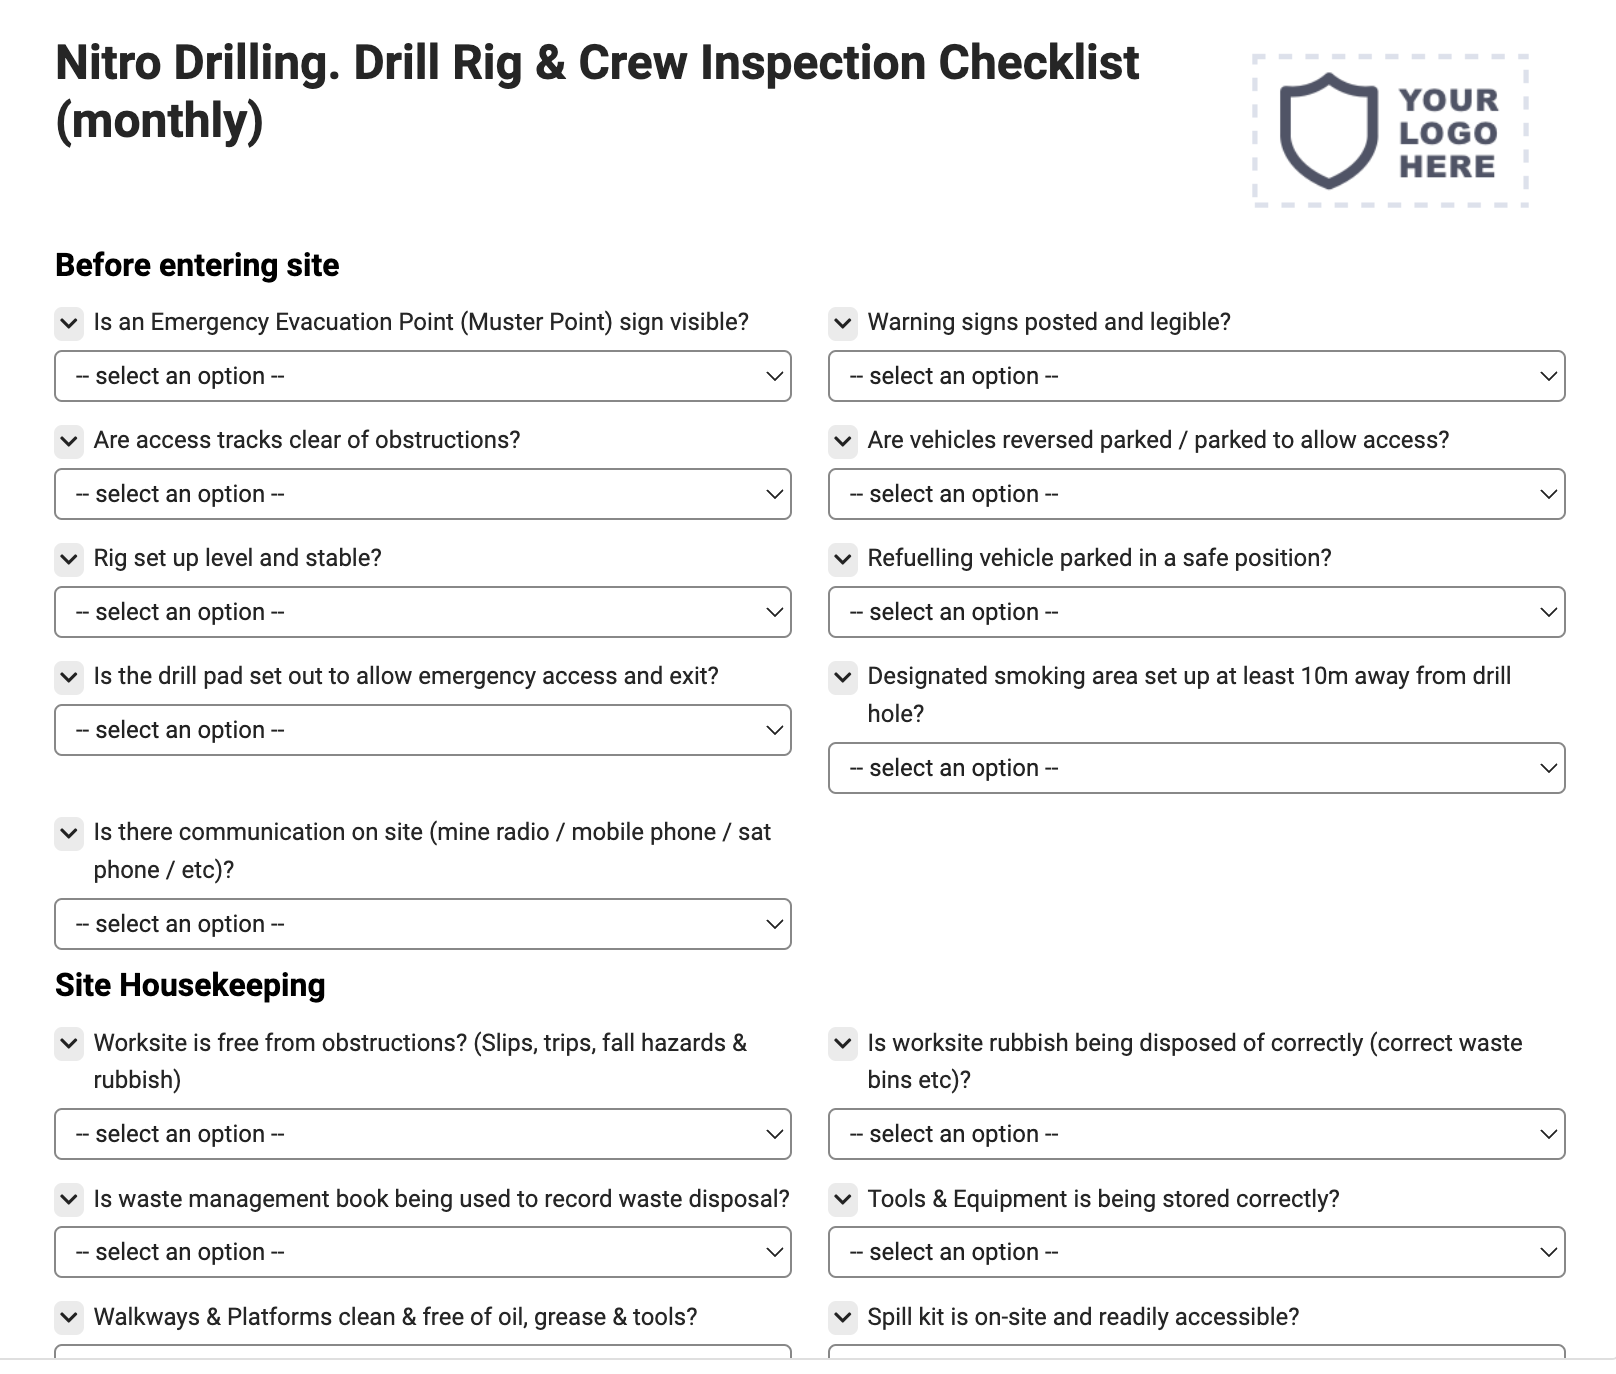 NITRO DRILLING. Drill Rig & Crew Inspection Checklist (monthly)